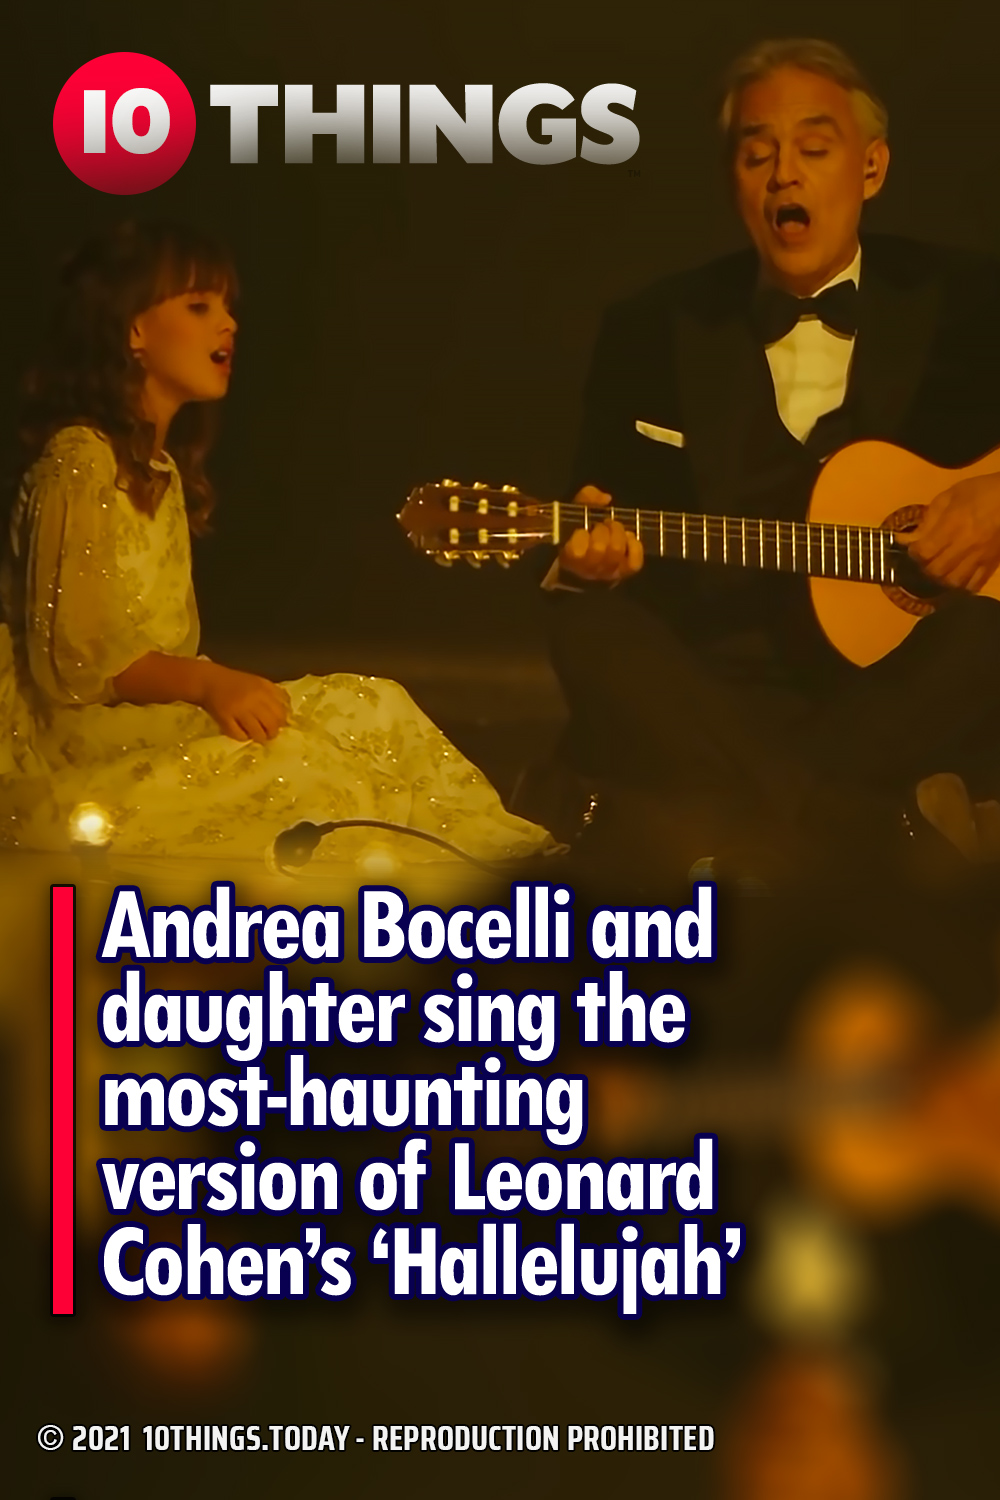 Andrea Bocelli and daughter sing the most-haunting version of Leonard Cohen’s ‘Hallelujah’